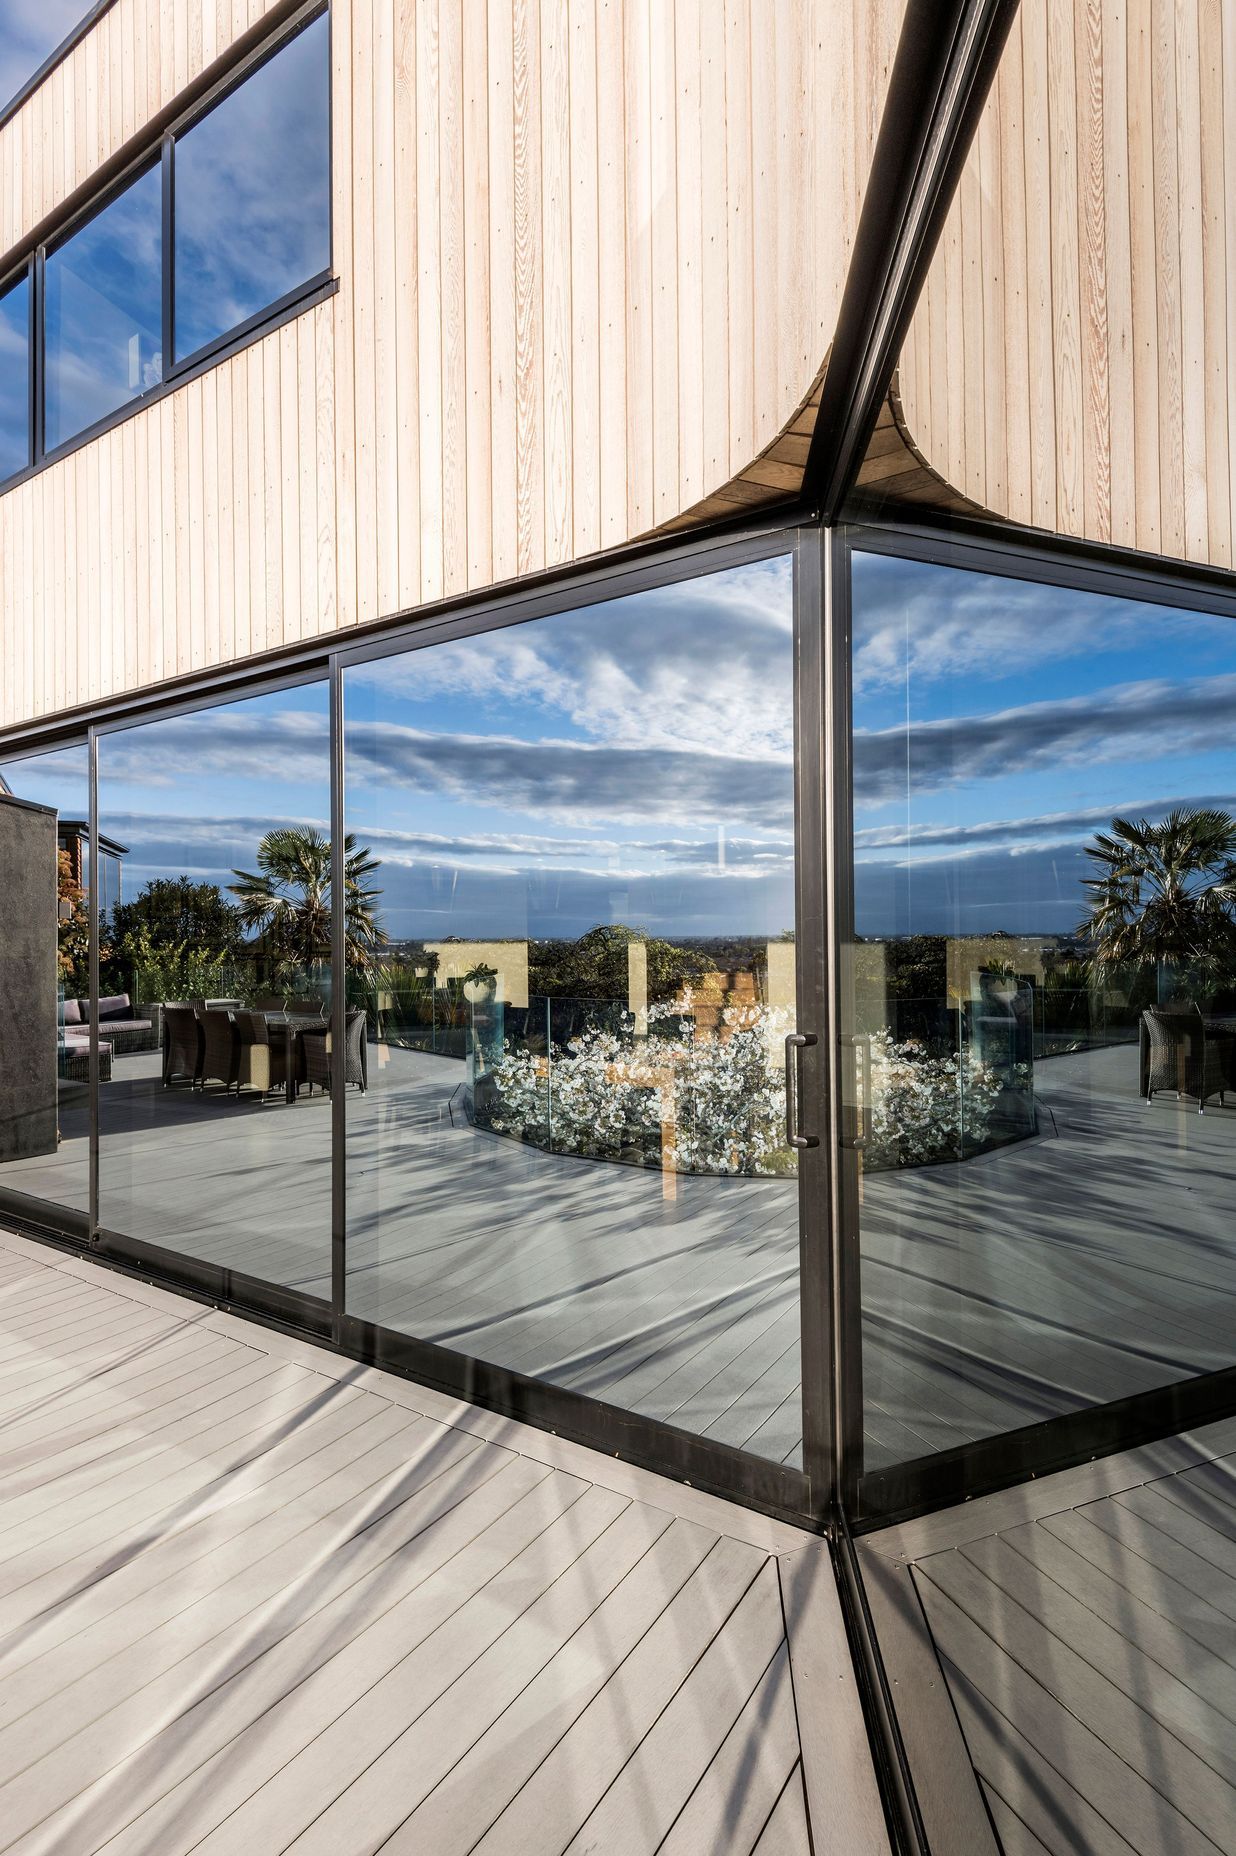 Tinted mirrored glass draws the landscape onto the glazed areas of the home.